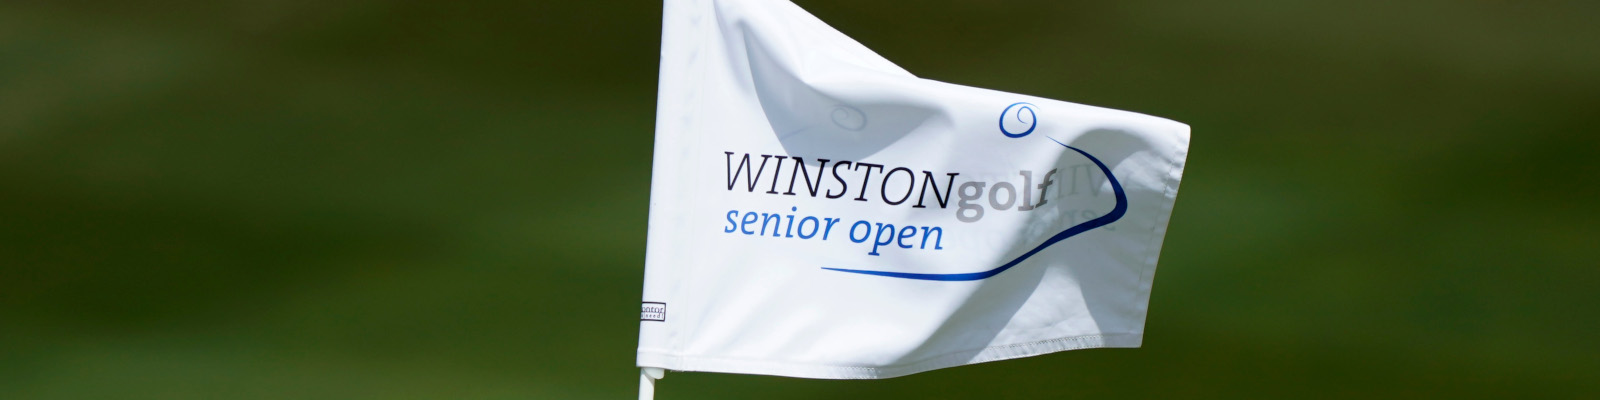 WINSTONgolf Senior Open (Photo by Phil Inglis/Getty Images)